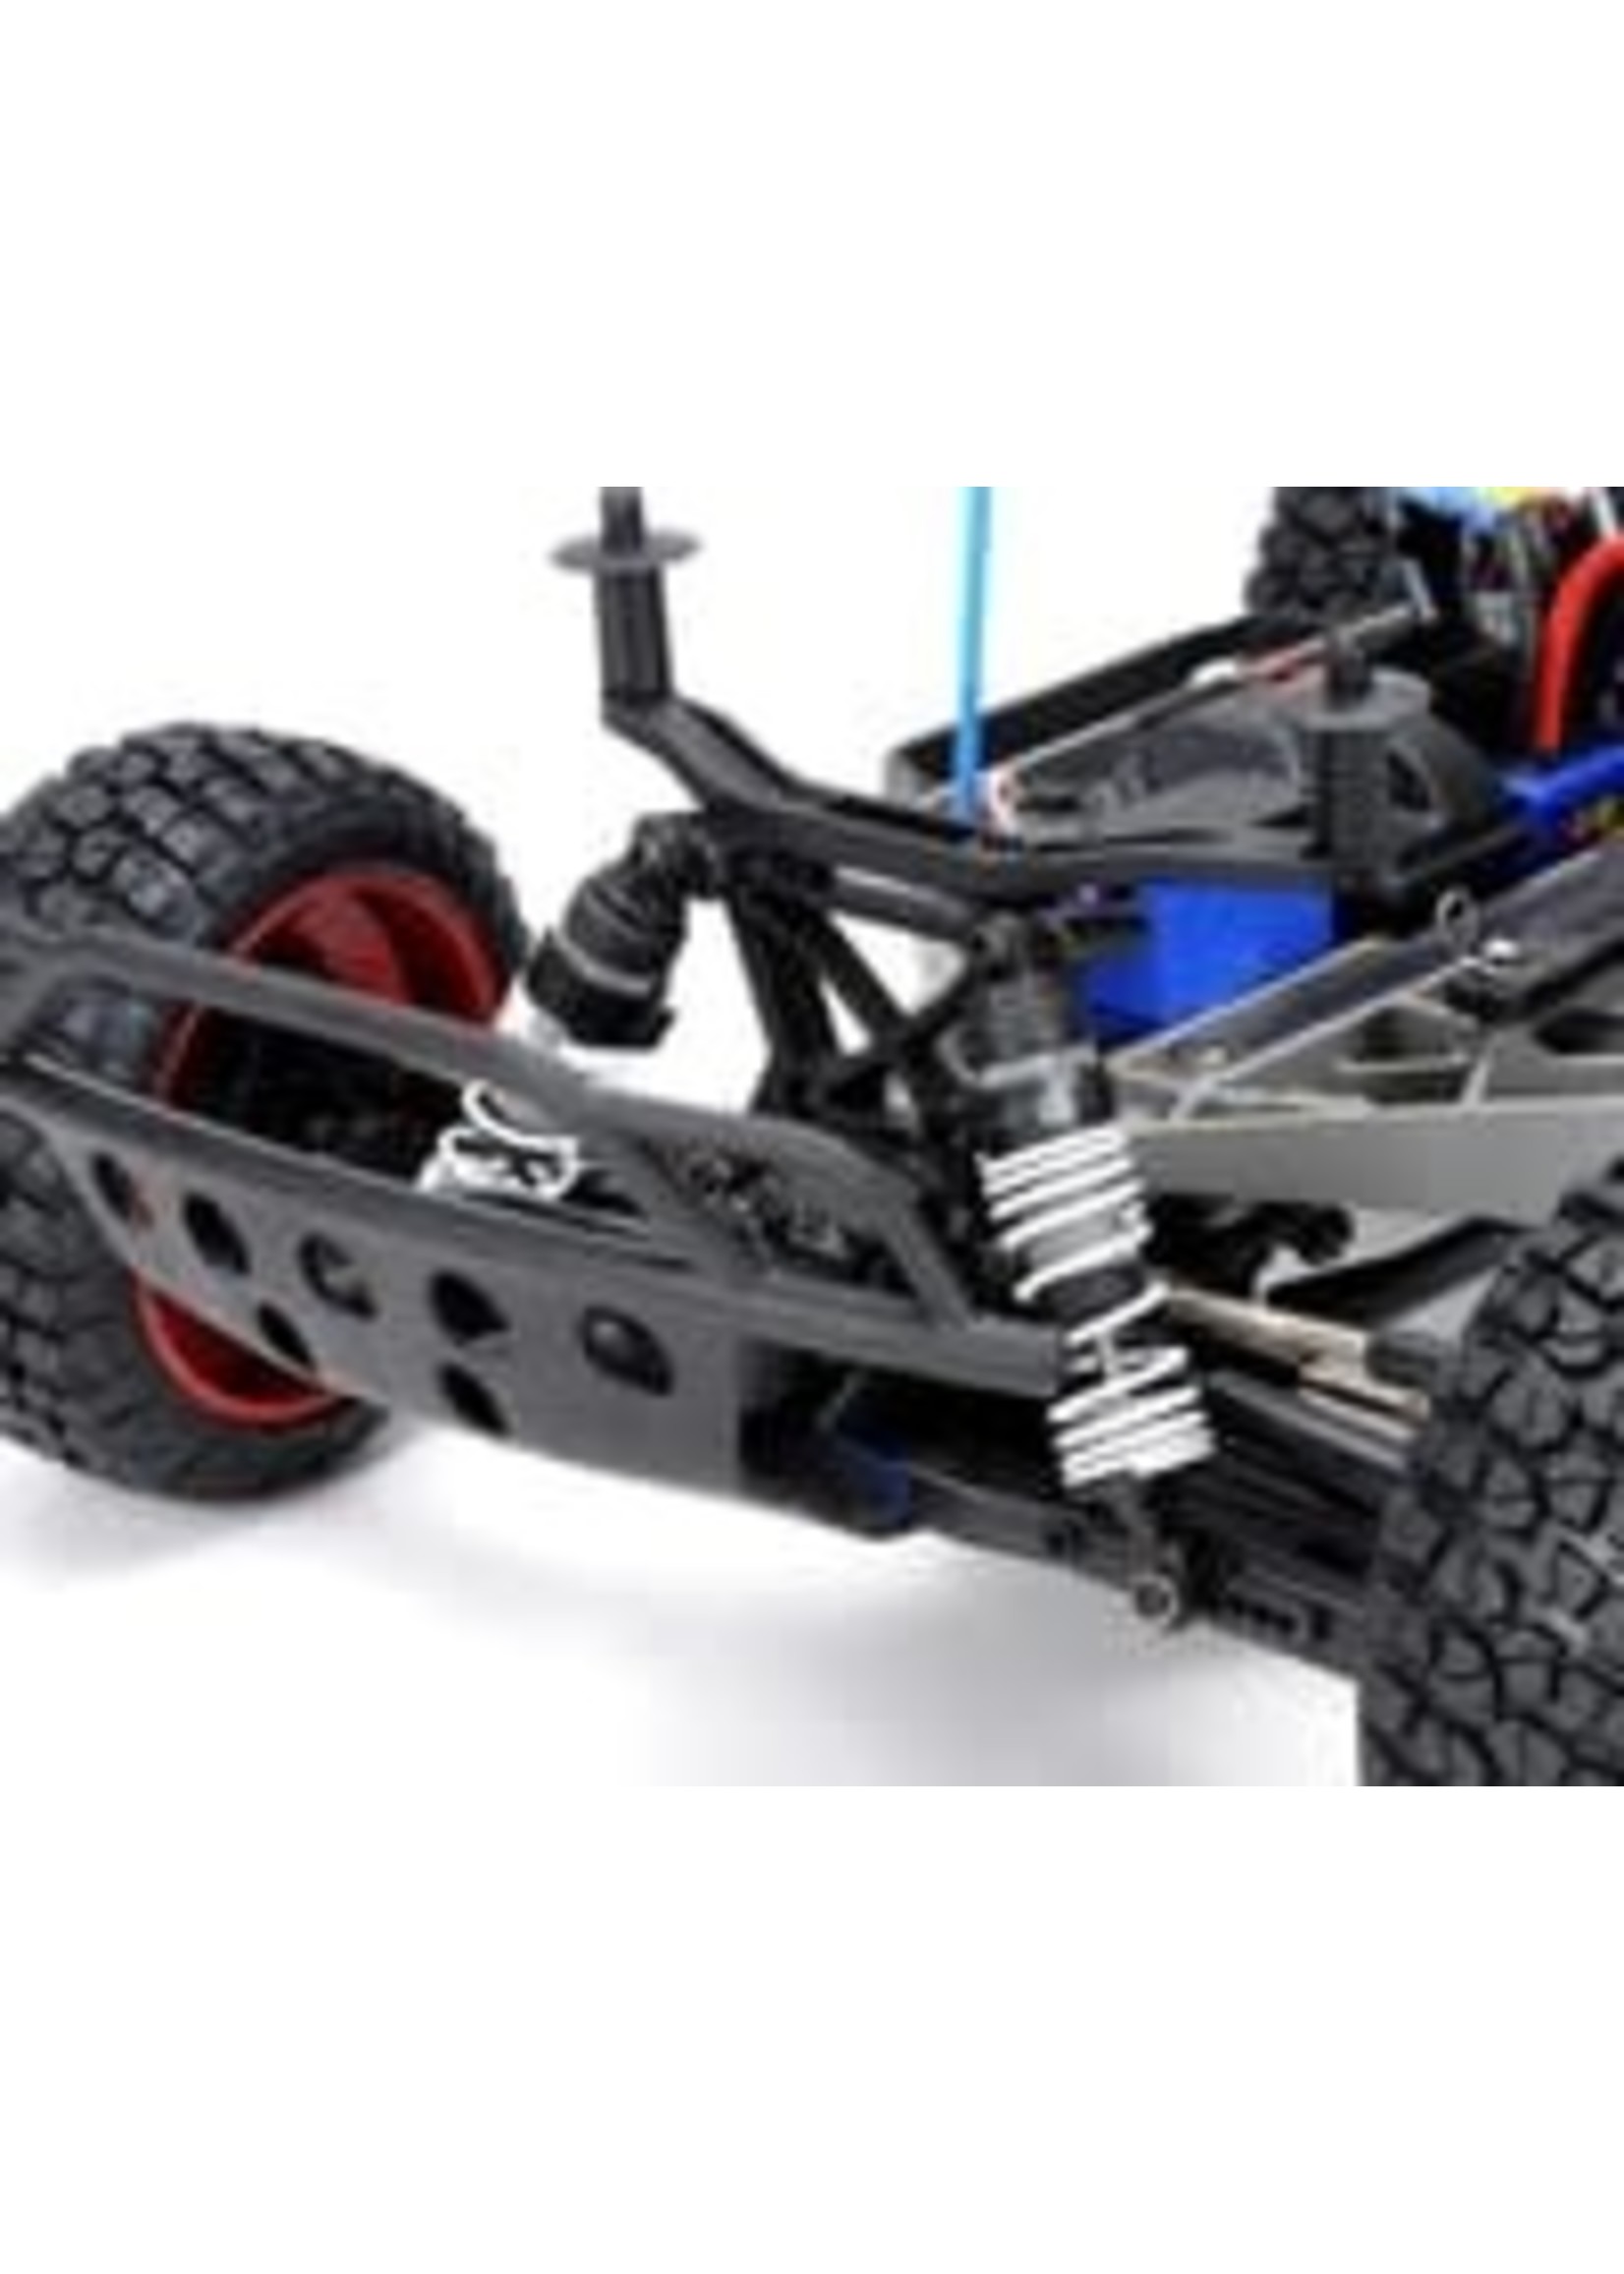 Traxxas 68086-4-RED Slash 4X4 VXL: 1/10 Scale 4WD Electric Short Course Truck with TQi Traxxas Link  Enabled 2.4GHz Radio System & Traxxas Stability Management (TSM)